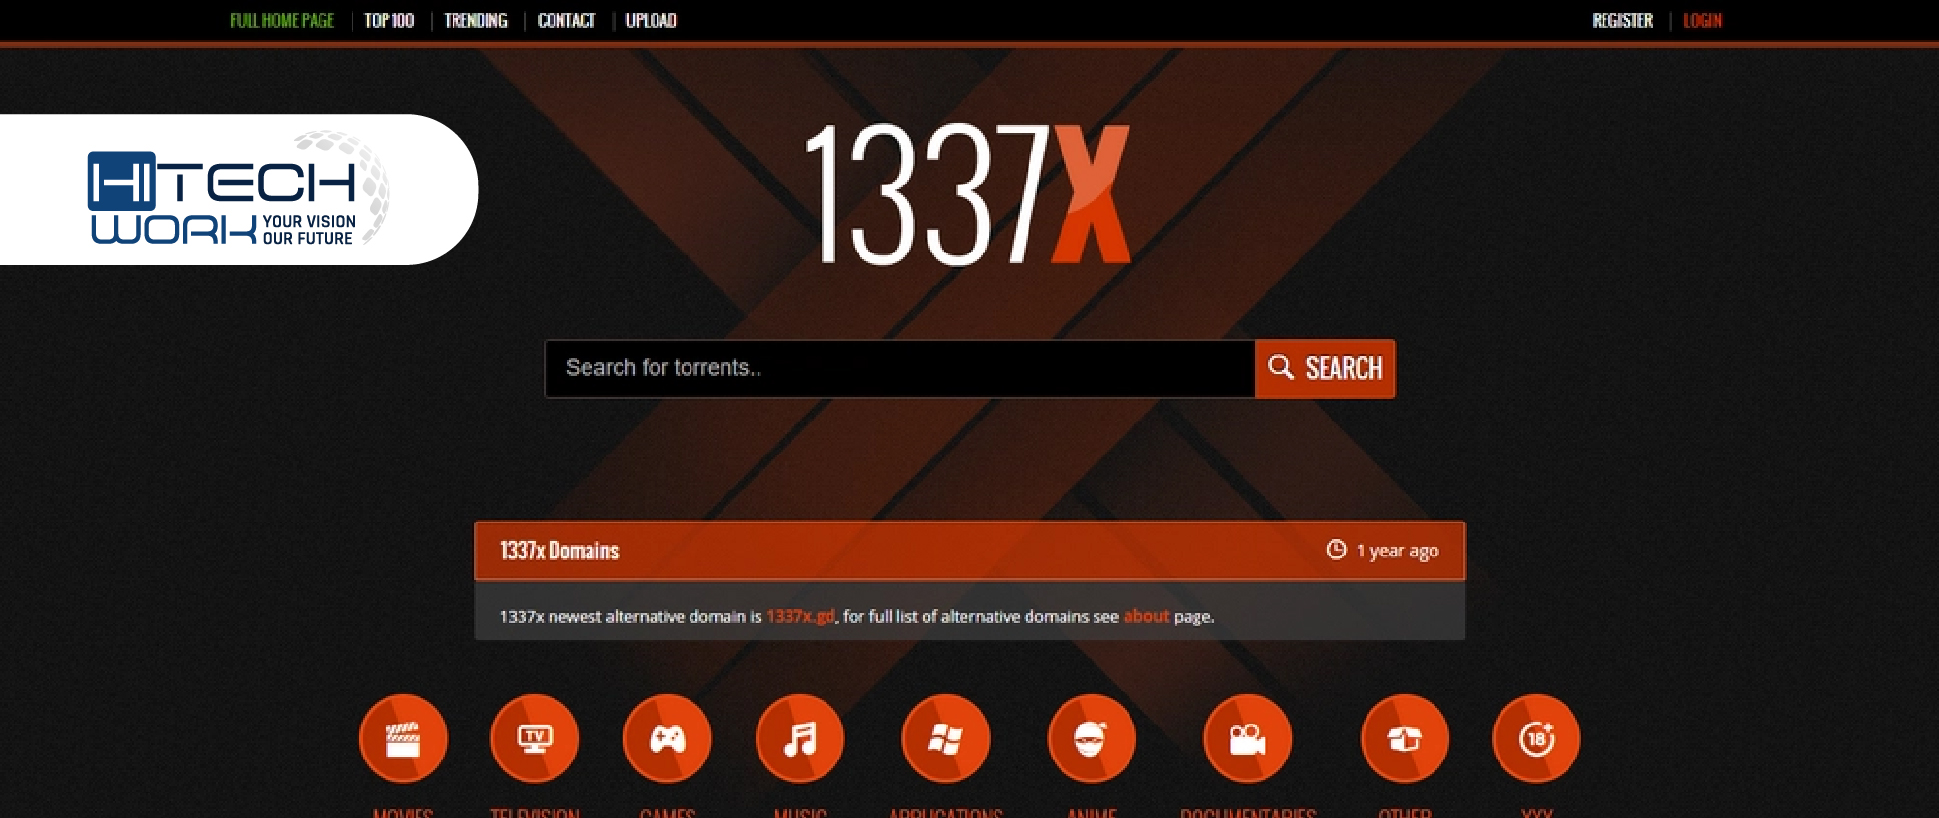 Download Movies & Apps From 1337x Torrent